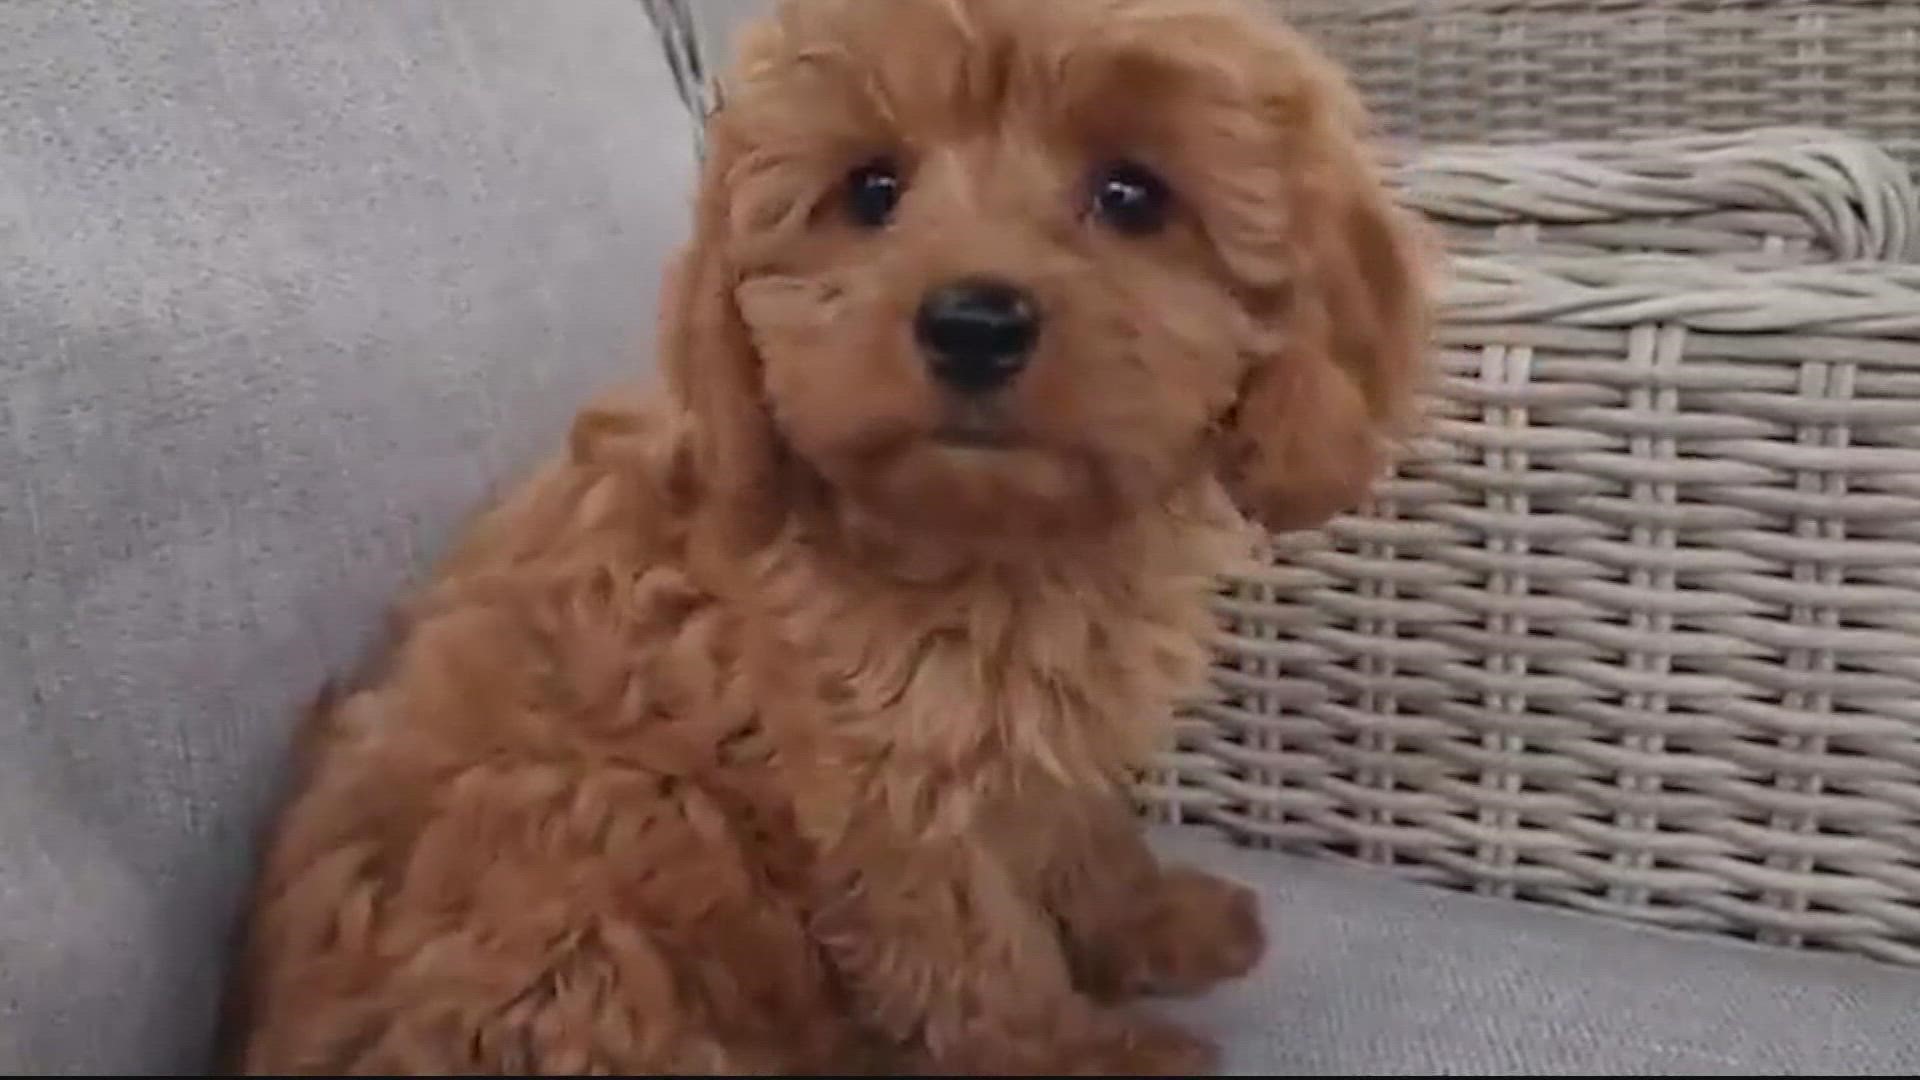 Donna James said she paid for a Cavapoo puppy through a breeder on Facebook. But she has yet to get the dog.